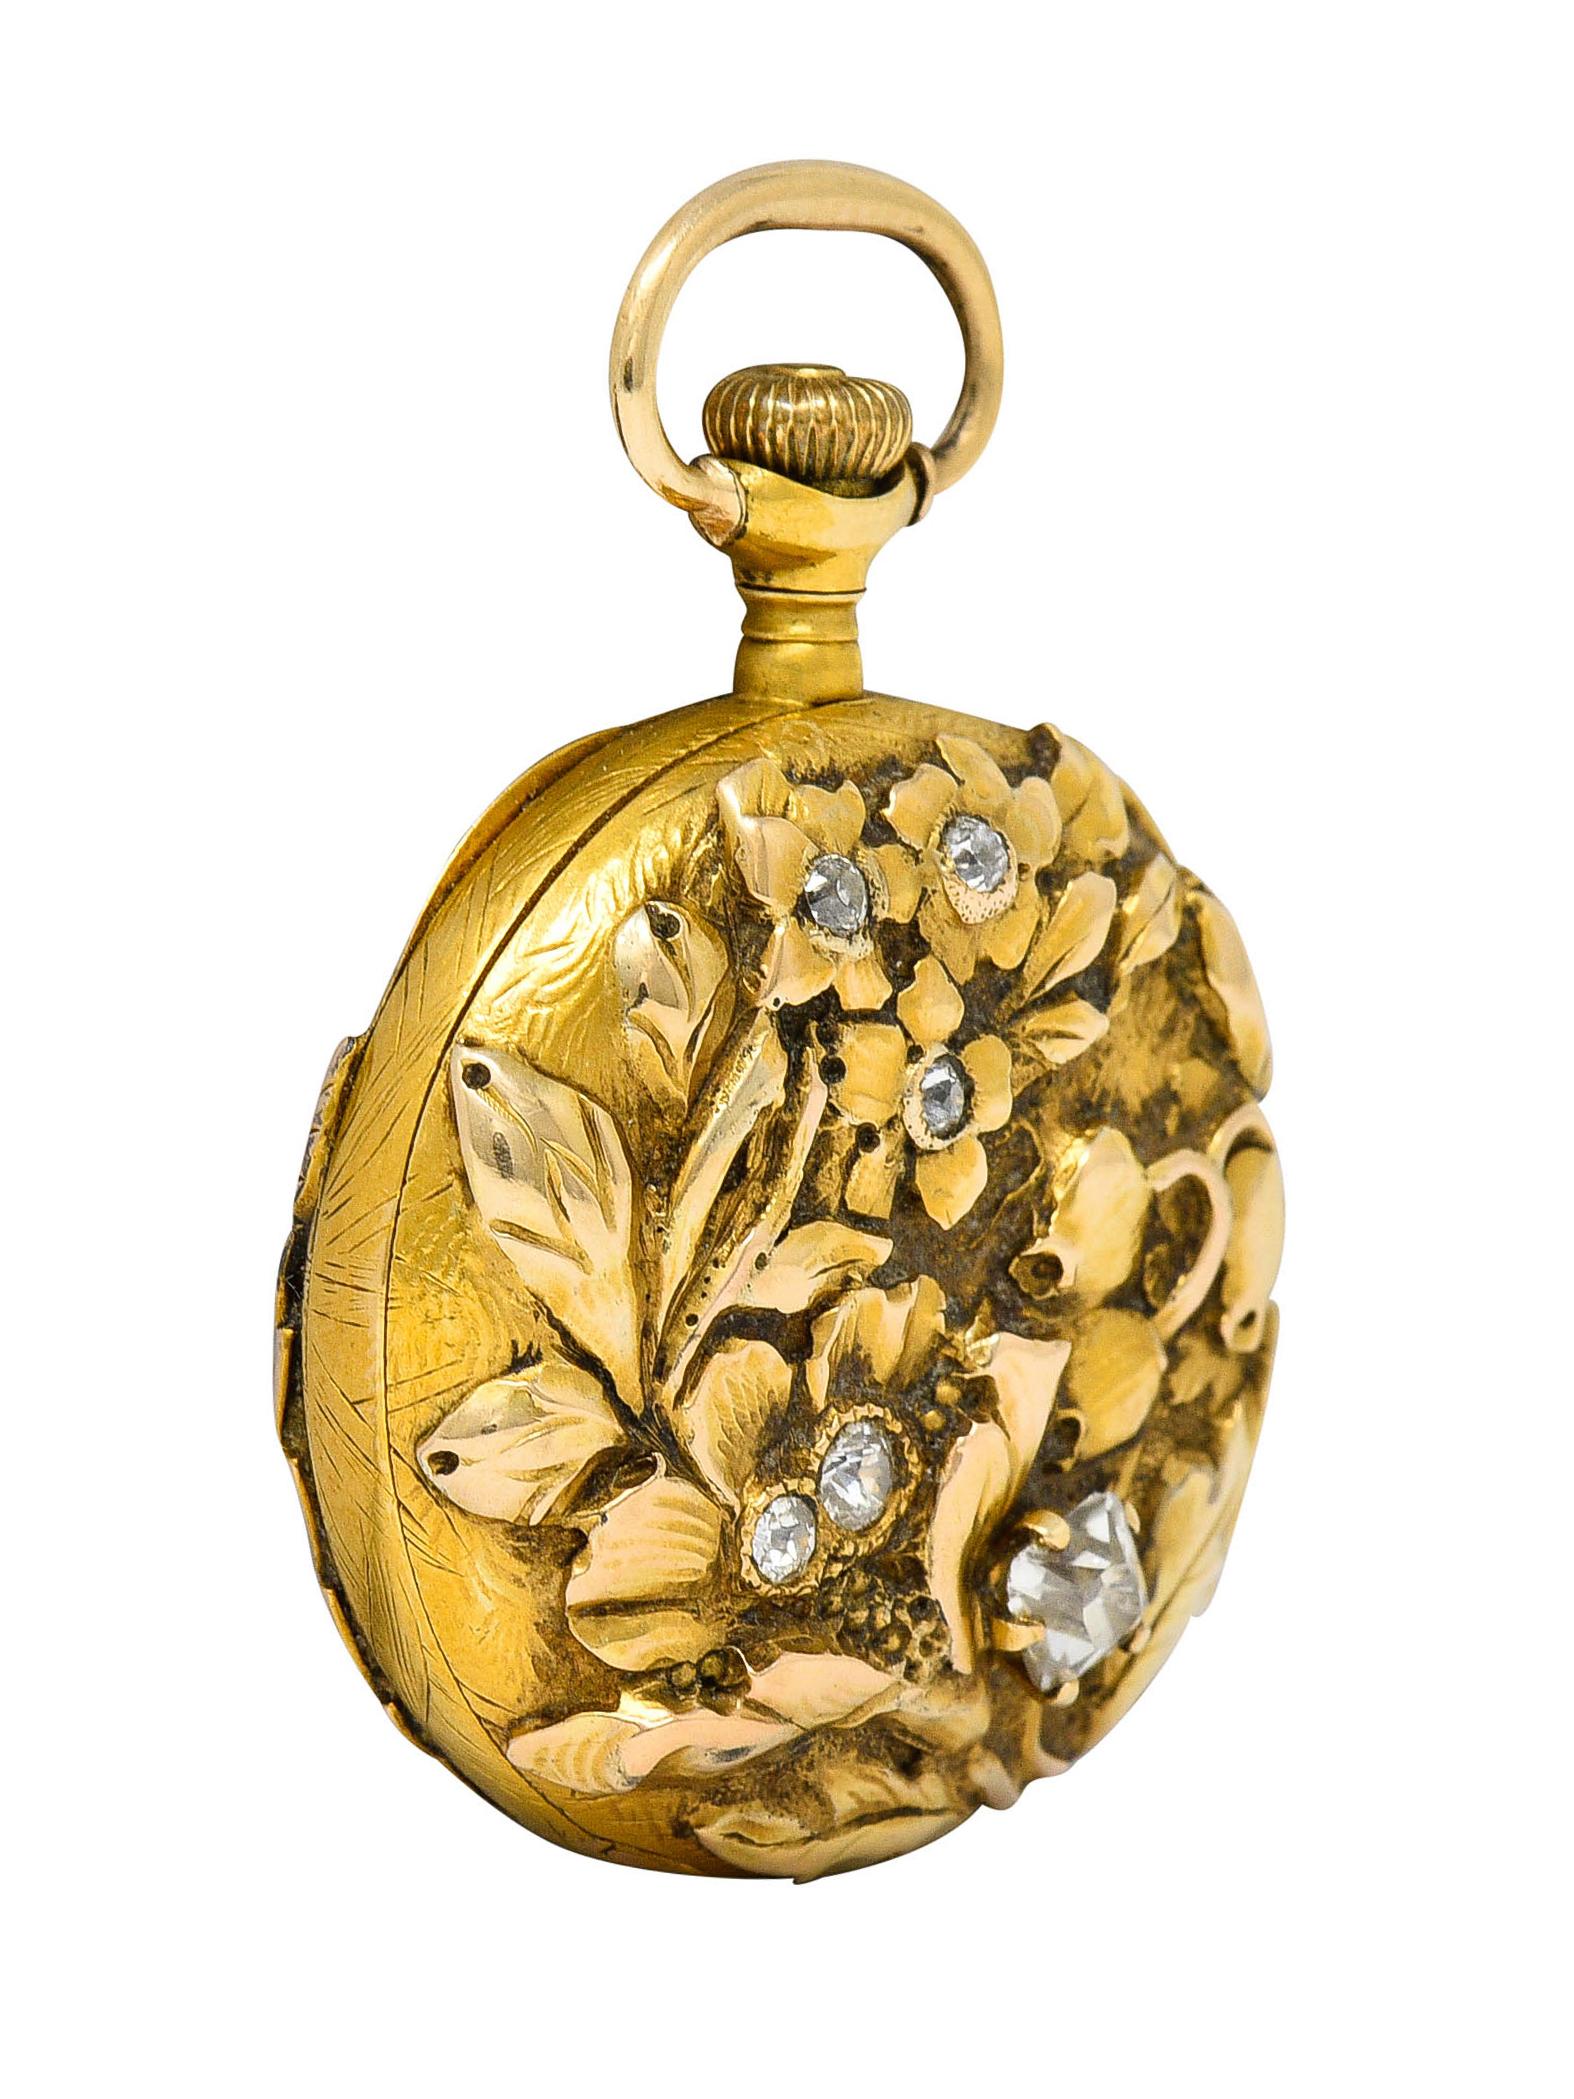 Circular pocket watch features a white face with gold numerals and antique watch hands

With a glass cover set in a 18 karat rose gold case with 18 karat yellow gold appliquè

Depicting highly rendered foliate and florals at back and front

Old mine